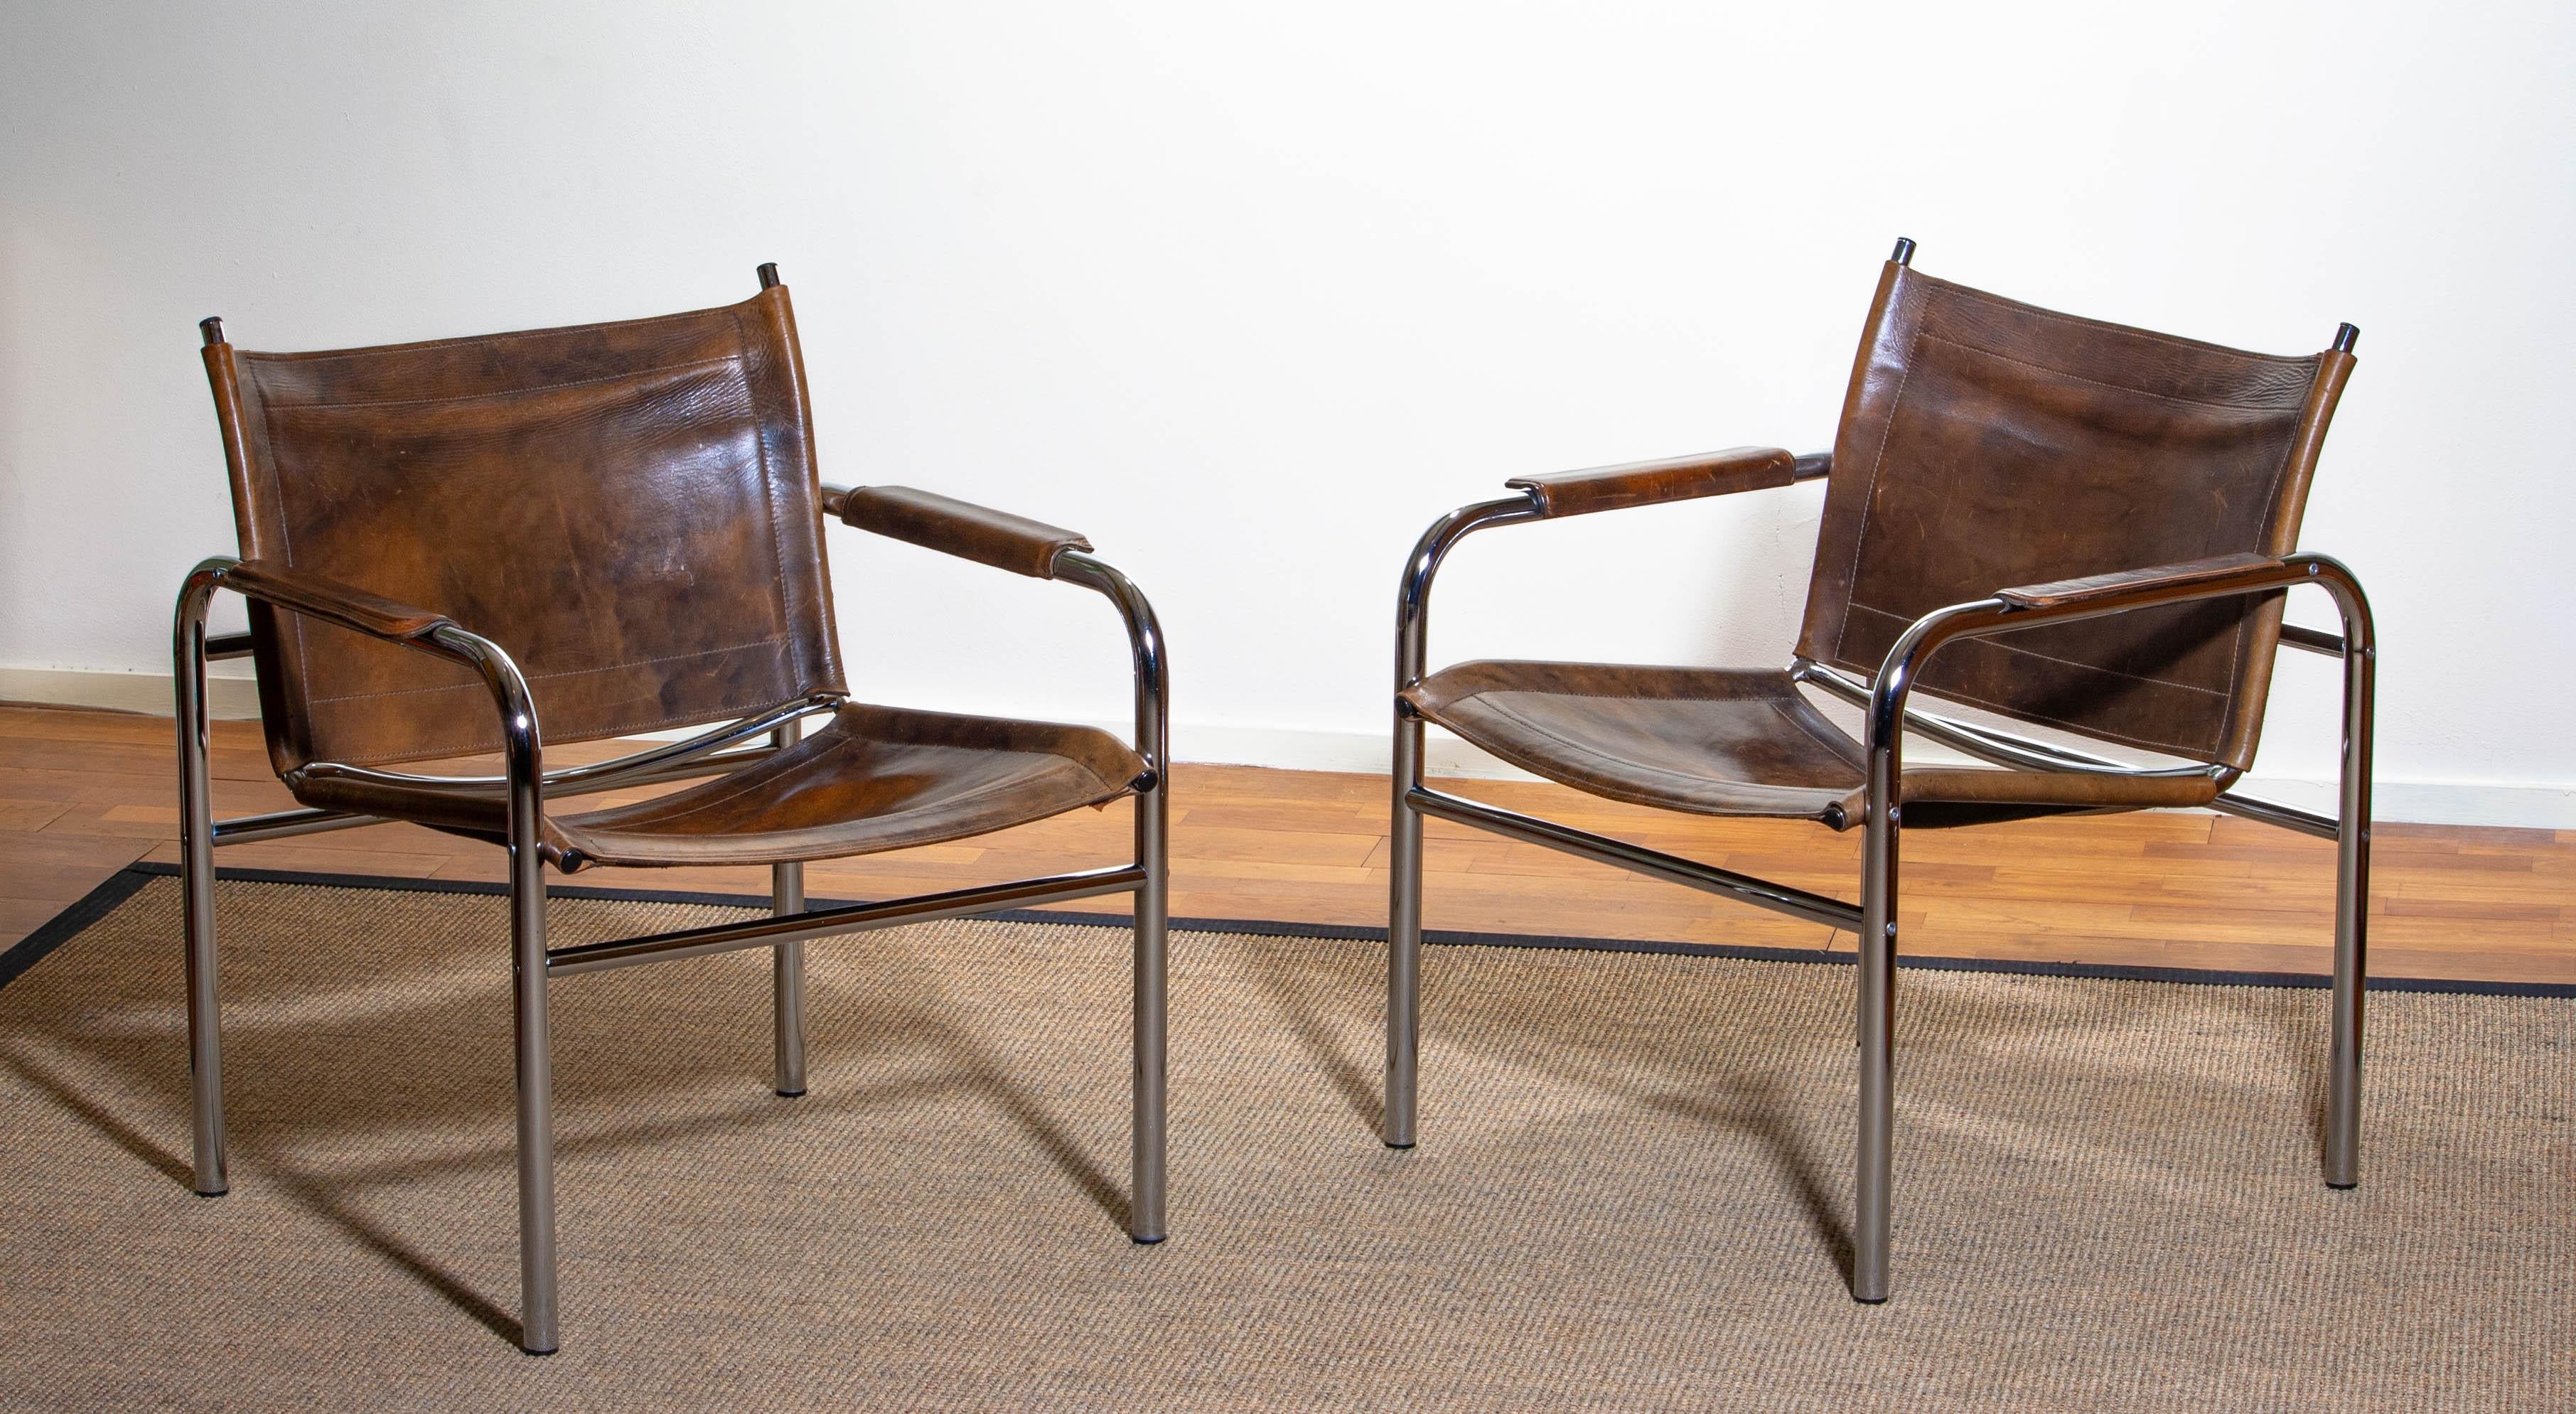 Scandinavian Modern 1980s, Pair of Leather and Tubular Steel Armchairs by Tord Bjorklund, Sweden 